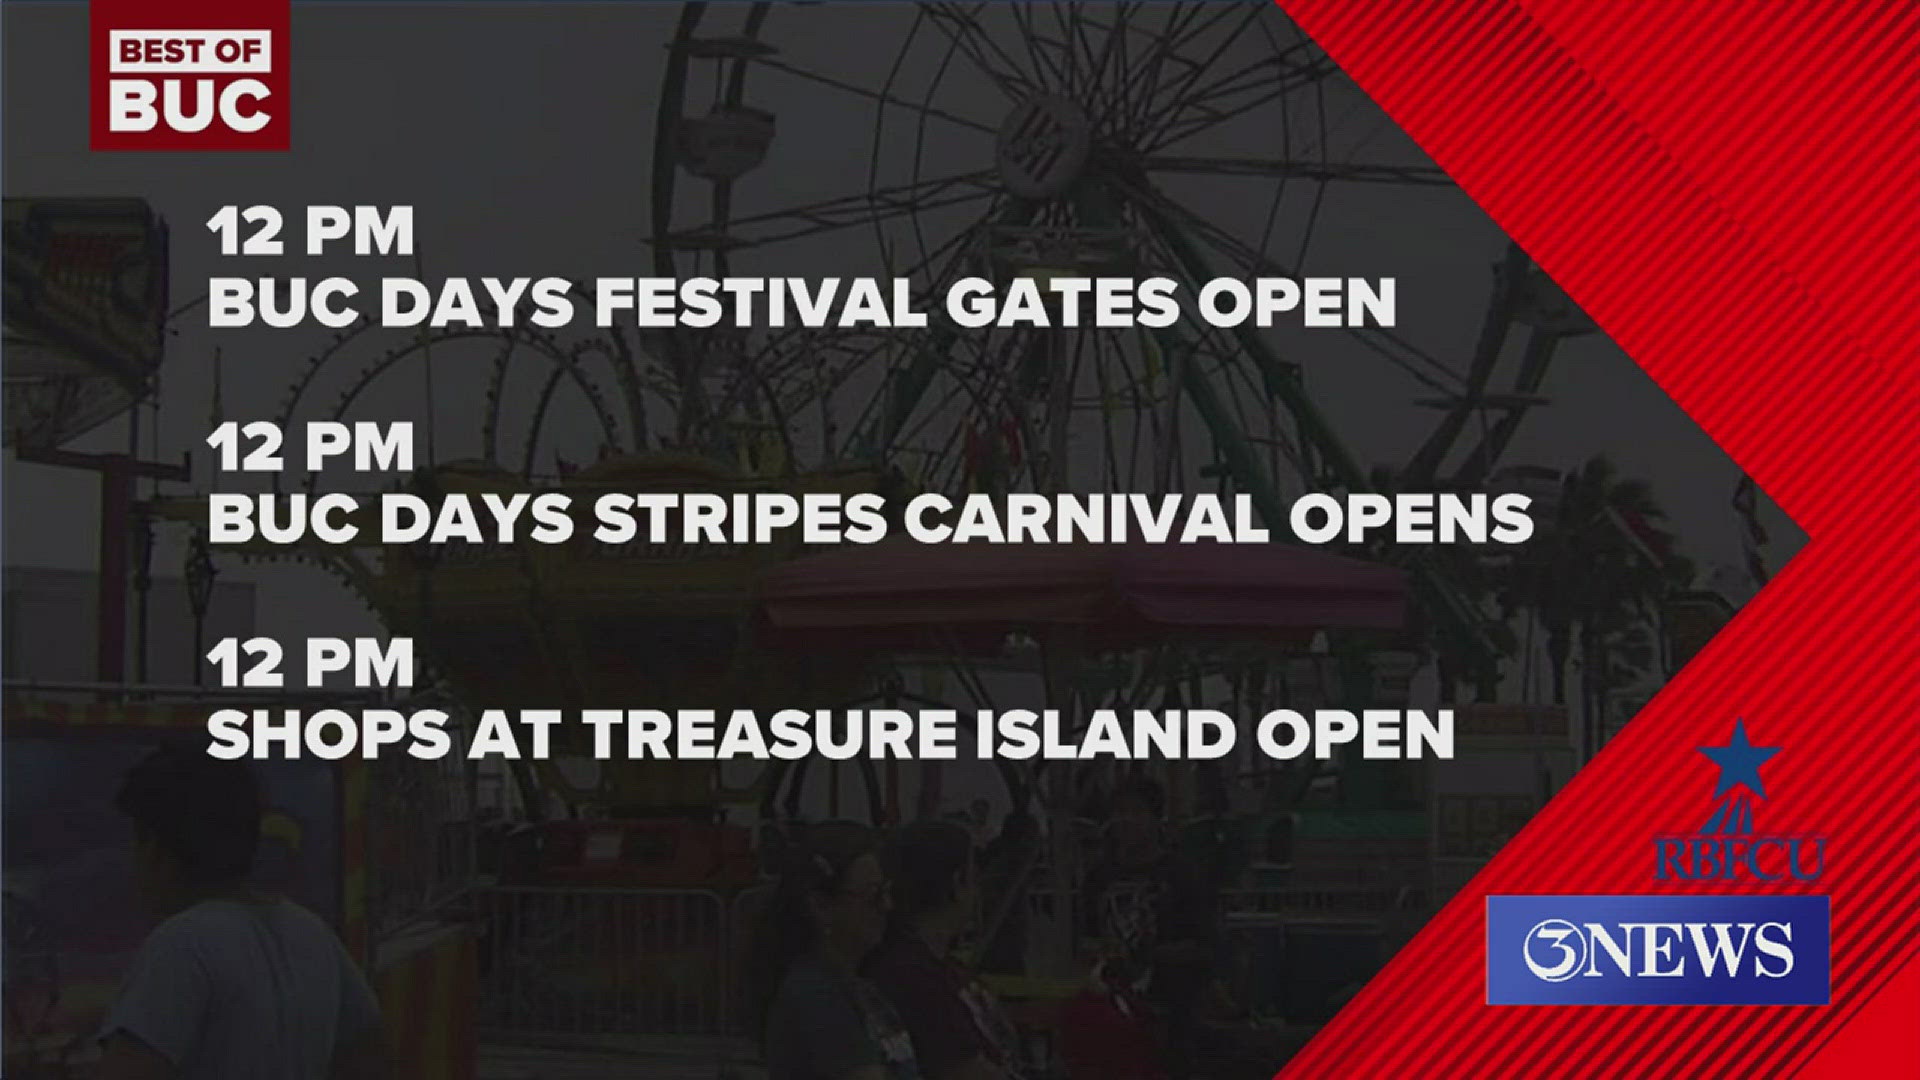 All the fun starts at noon, so make sure to head out to the carnival and all the Shops at Treasure Island will be open, so take advantage of those deals!